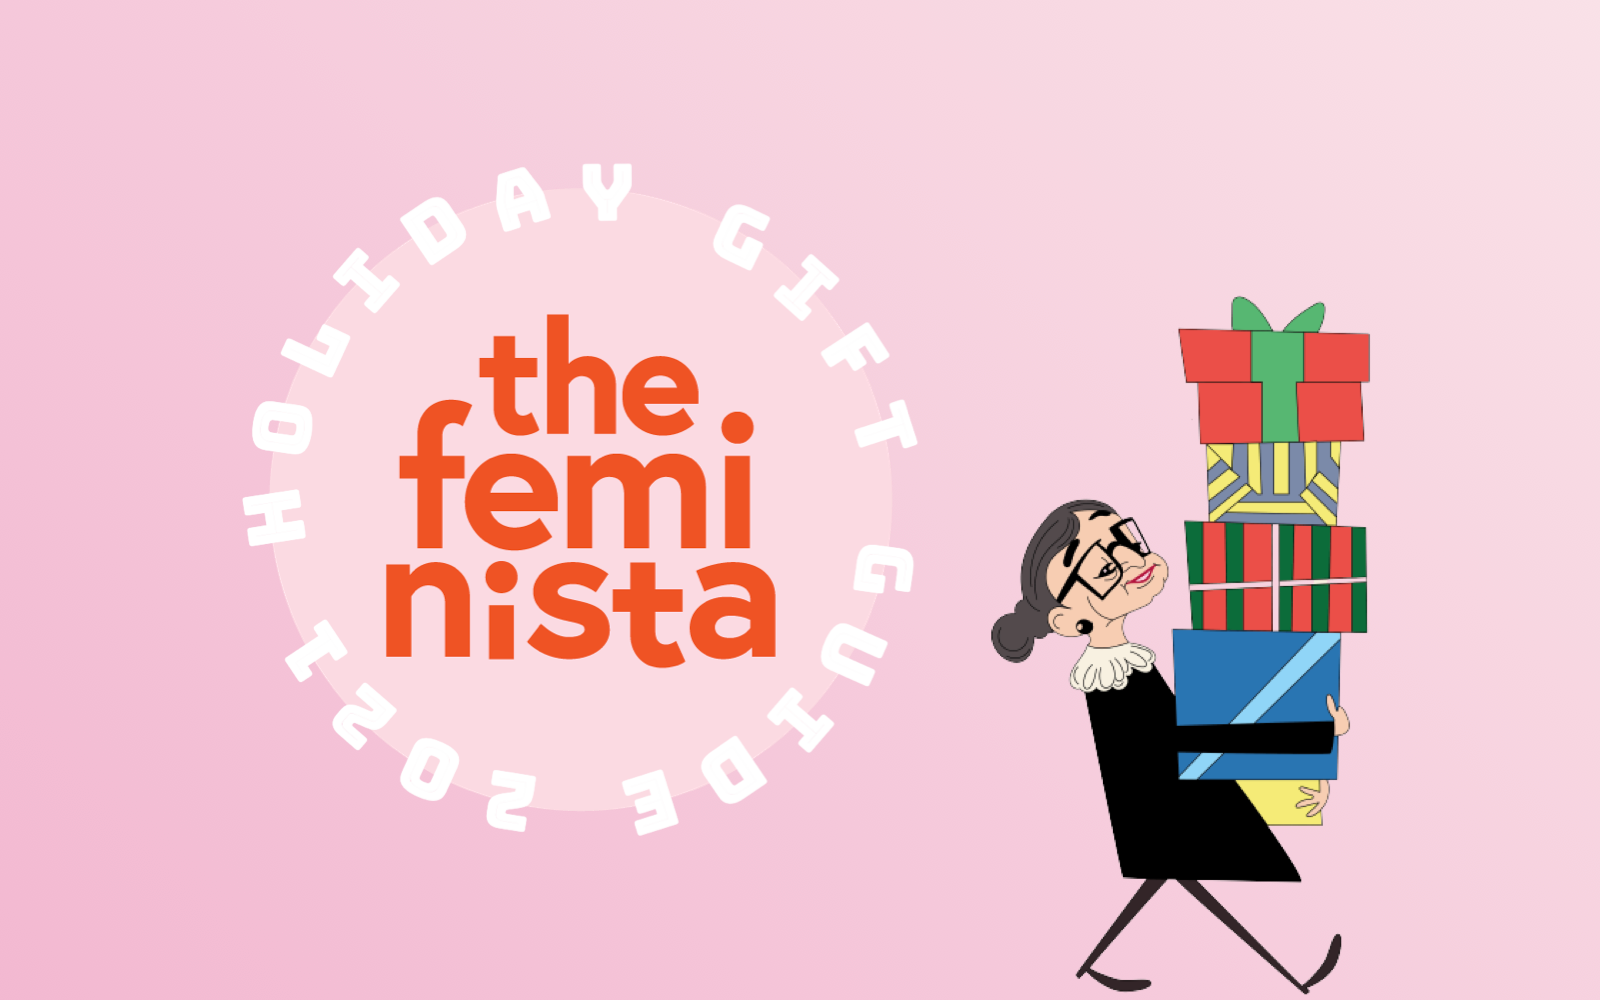 "The Feminista 2021 Holiday Gift Guide" with a cartoon Ruth Bader Ginsburg carrying feminist holiday presents